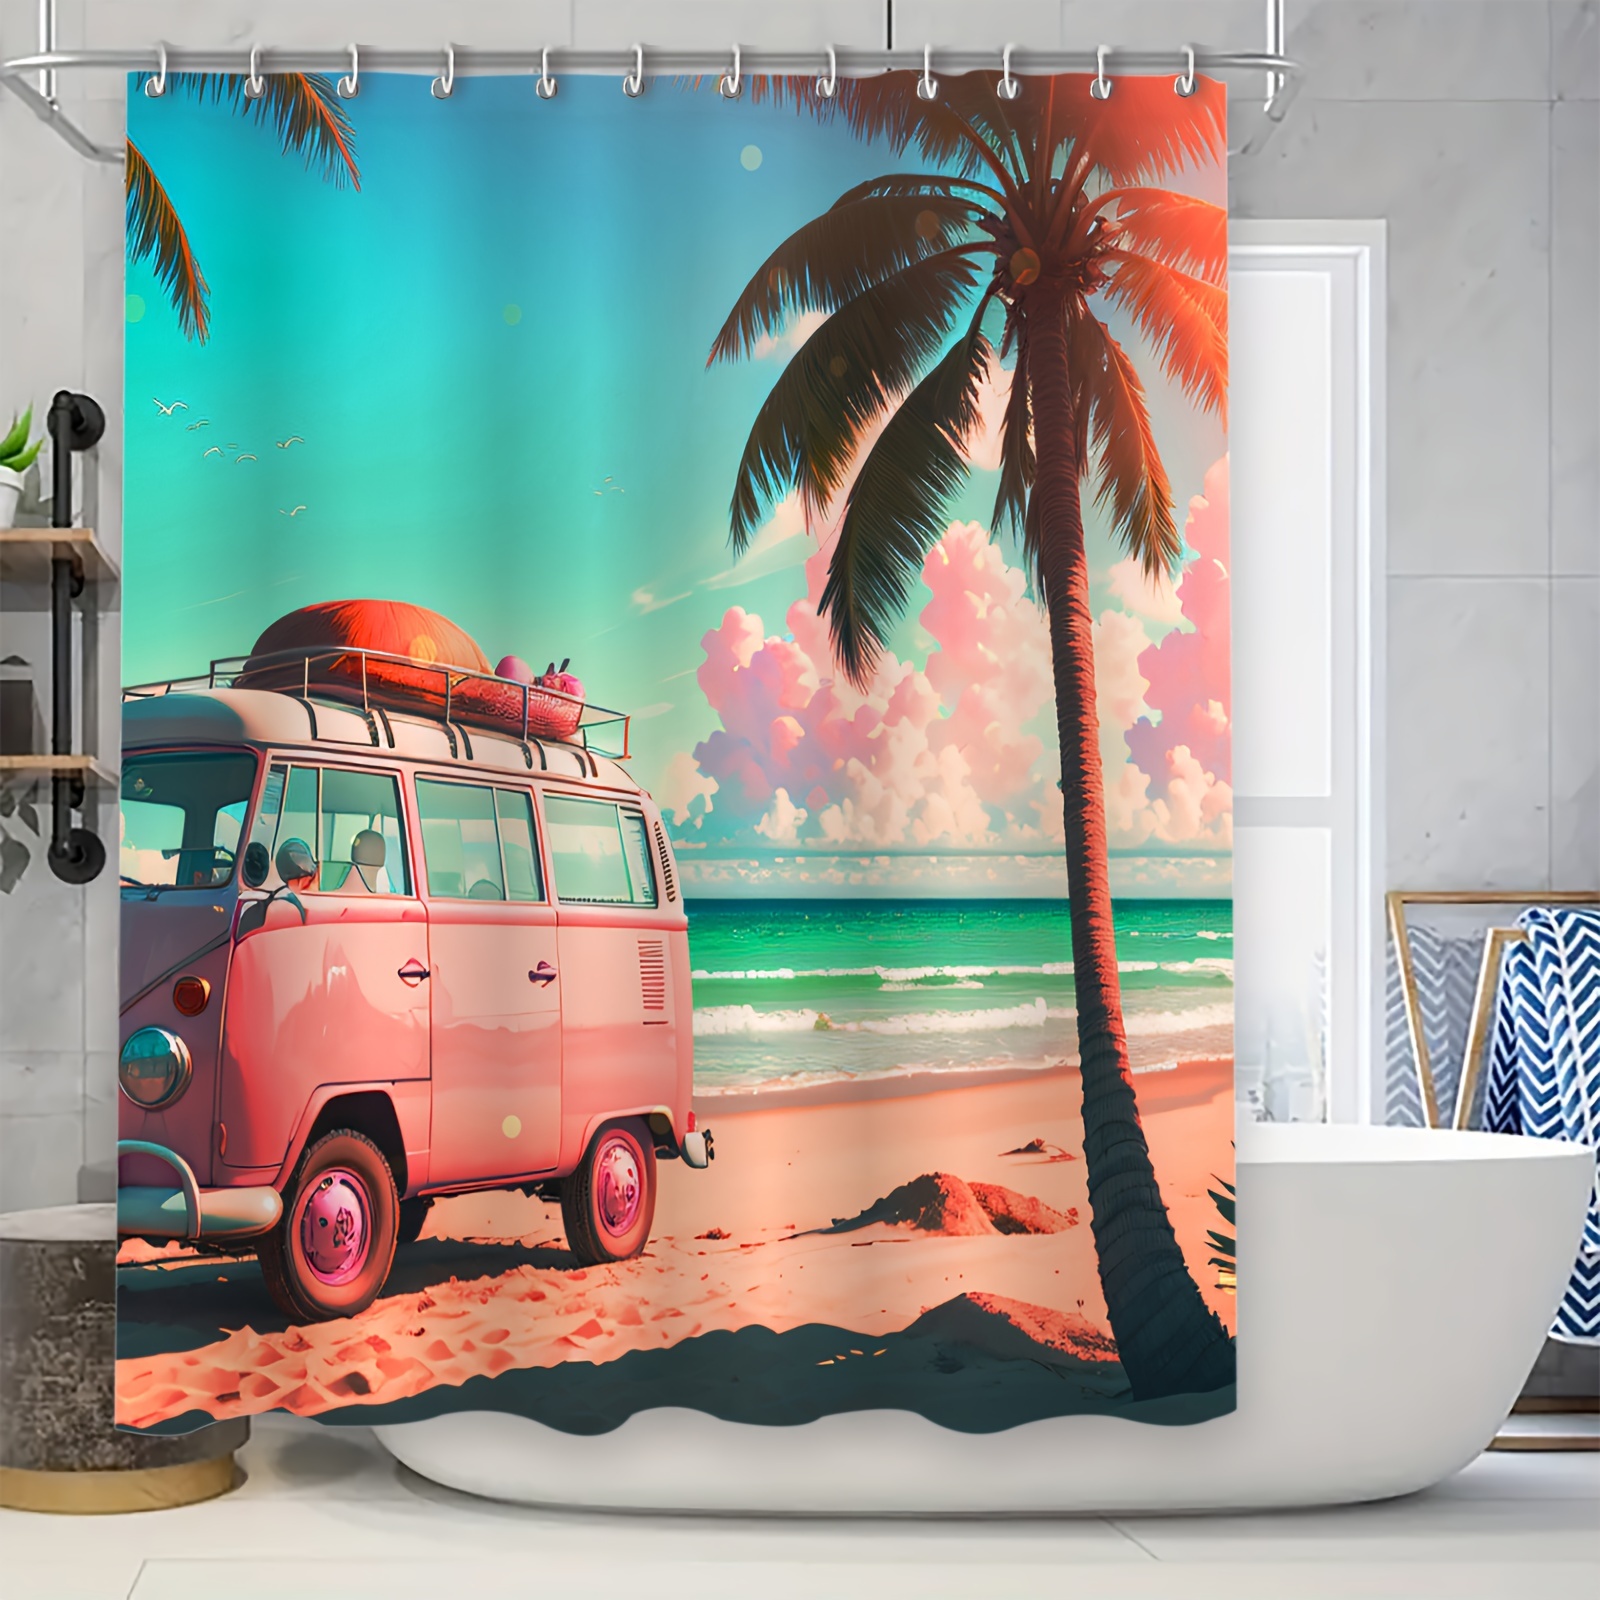 

Beach Sunset Pink Bus Shower Curtain Set With 12 Hooks, 70.8x70.8 Inch Water-resistant Polyester Bathroom Partition Curtain, Fashionable Tropical Theme Bath Decor, Machine Washable Unlined Curtain